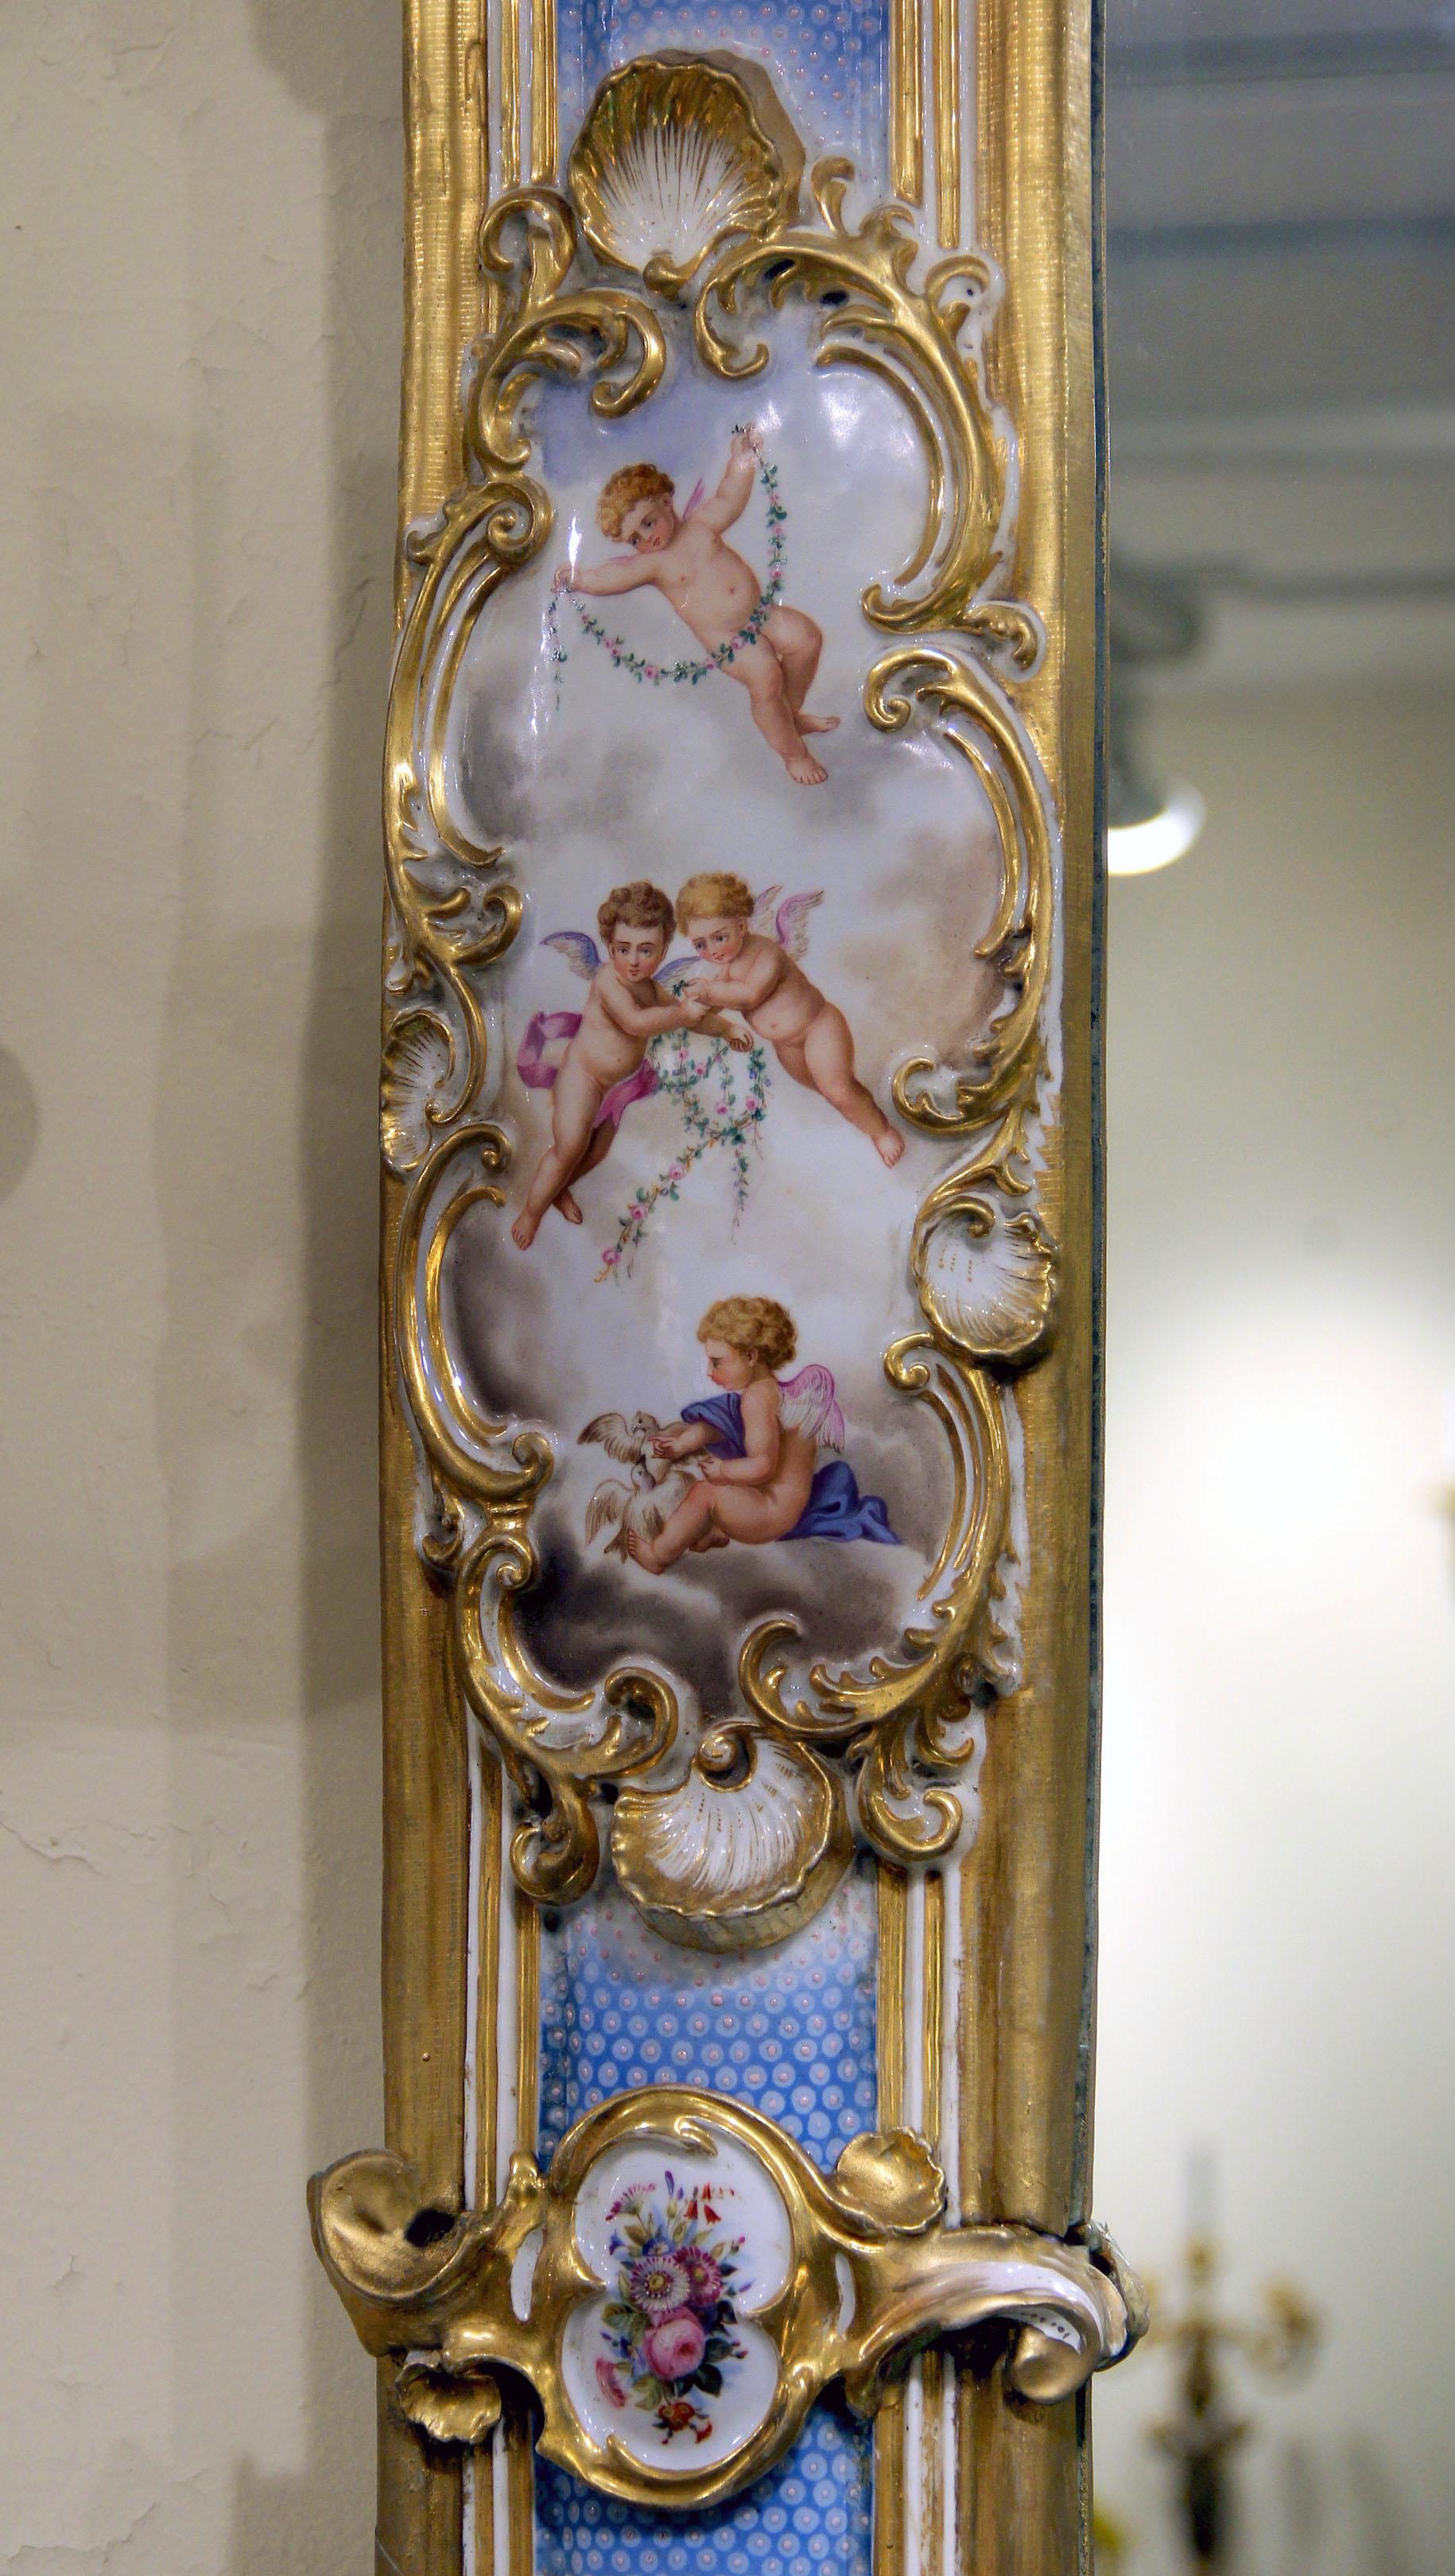 Hand-Painted Rare and Special Palatial Pair of Late 19th Century Sèvres Porcelain Mirrors